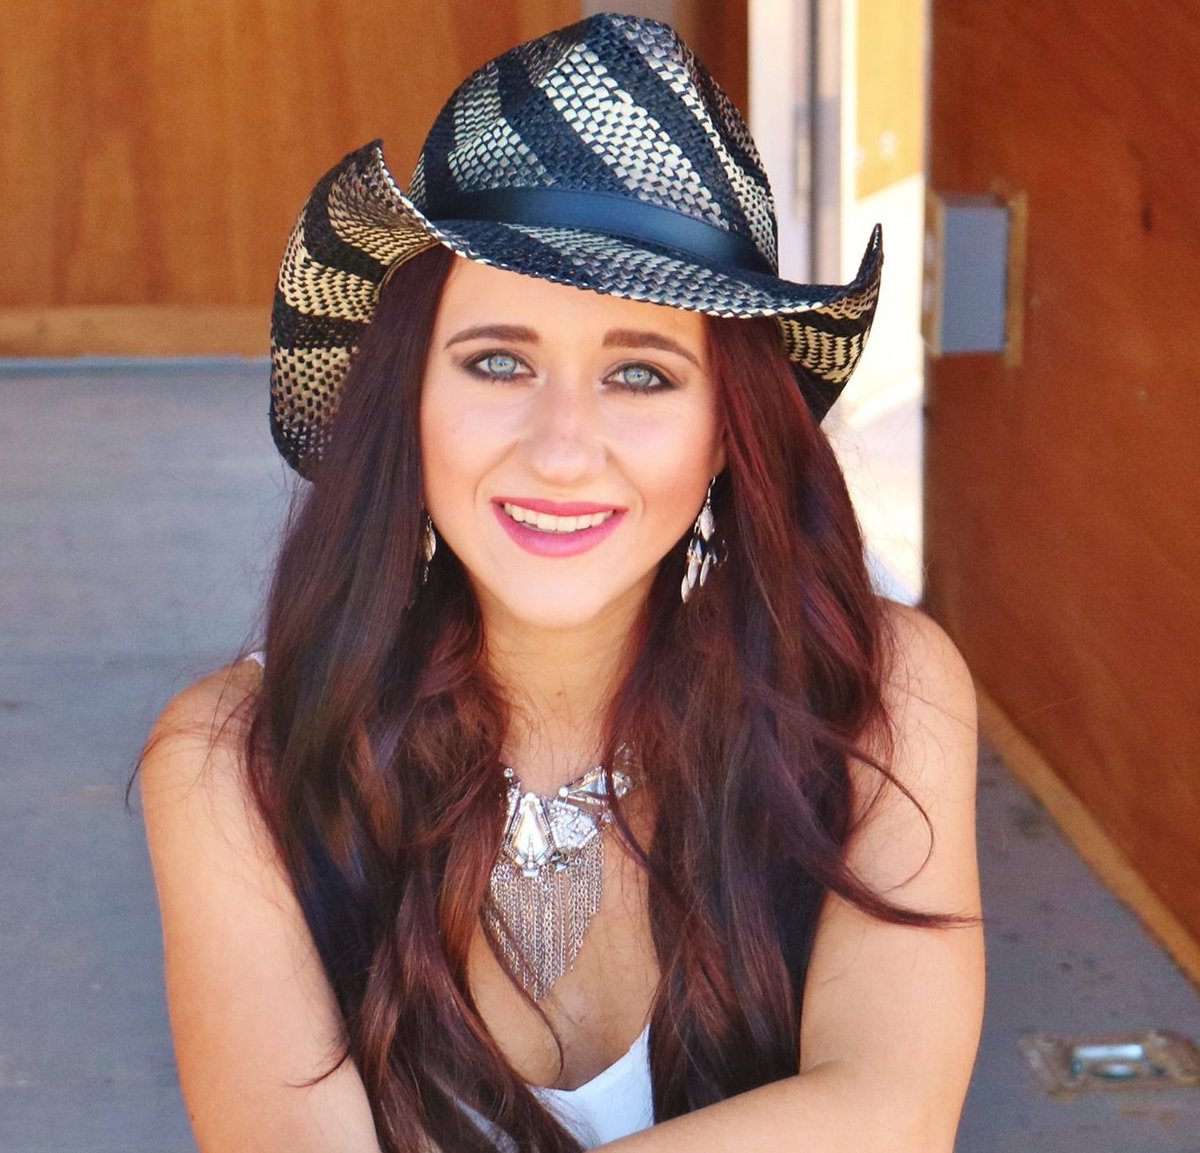 Hey y’all! I’ll be on #FacebookLive today at 5pm PDT! Can’t wait to see you then!#countrymusic #truecountry #Simplelifetour #CMT facebook.com/AshleyWineland…